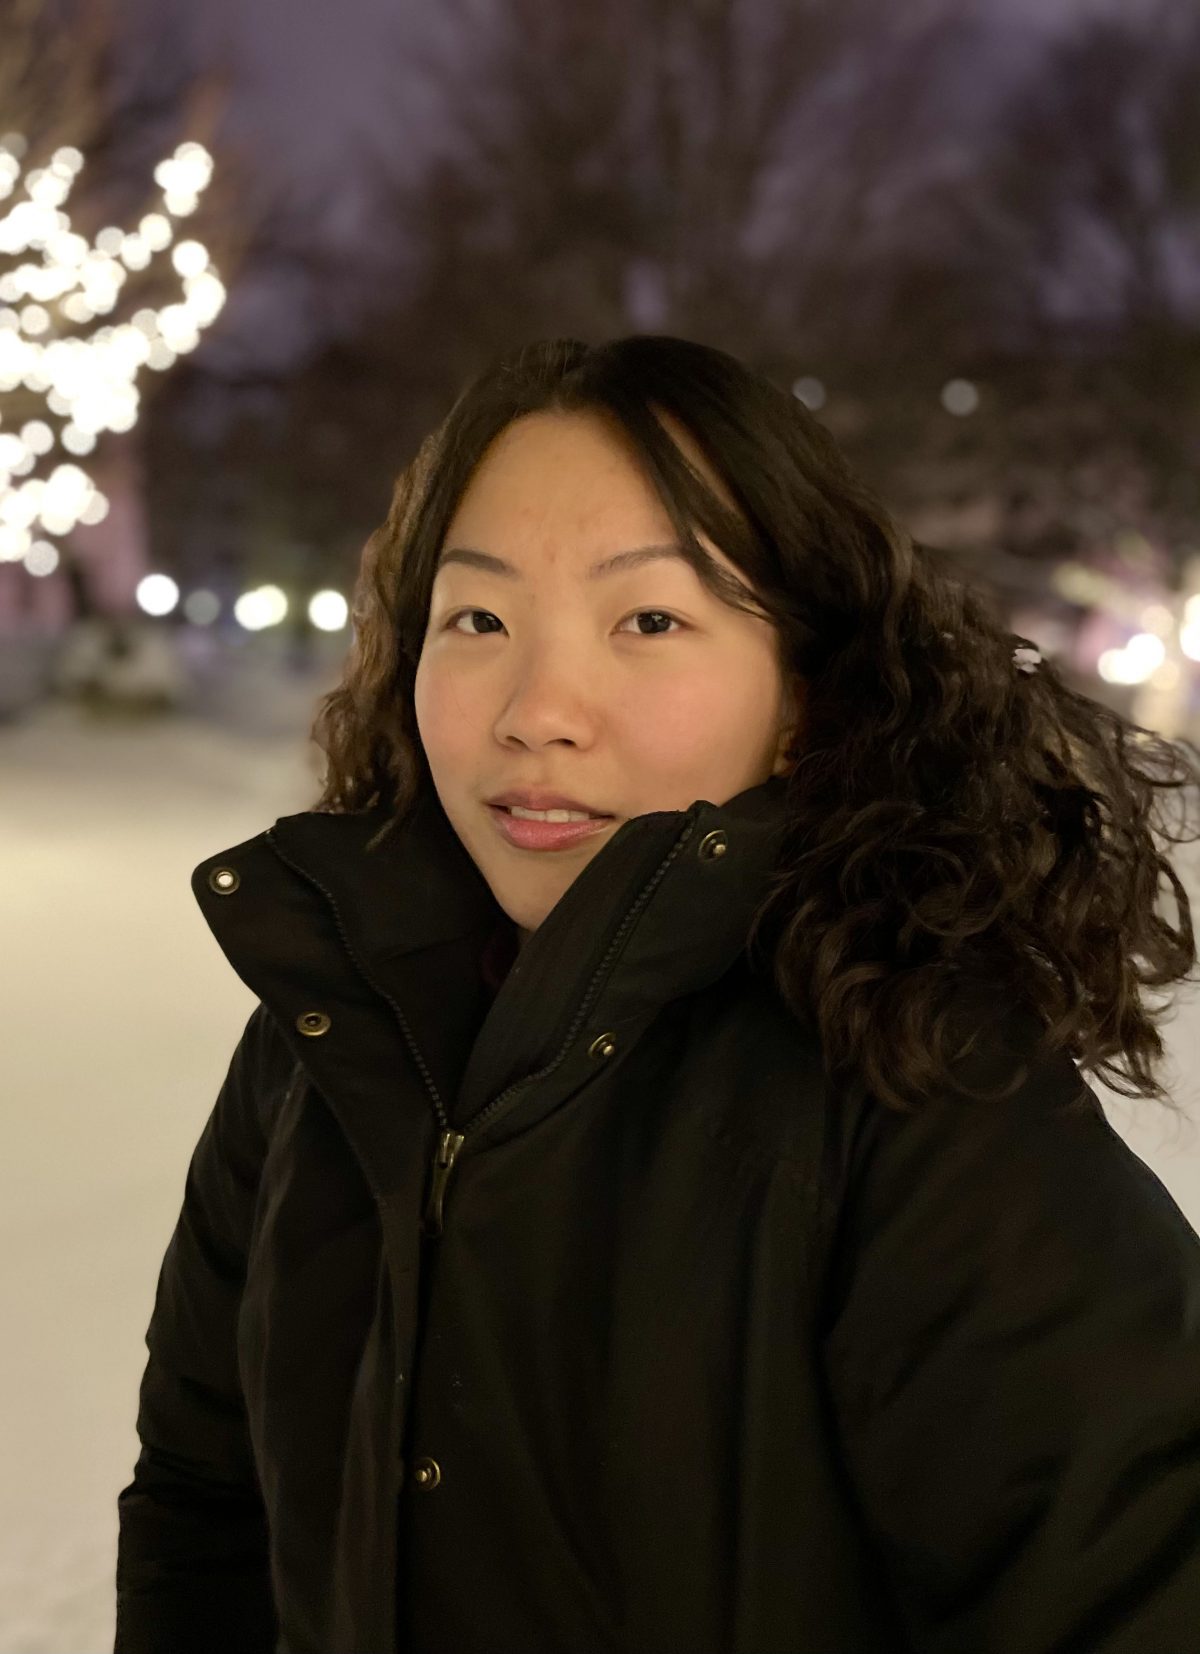 The Art of Film Production: Fourth-Year CMS and Visual Arts Major Anastasia Liu on Film Editing and the Politics of Asian-American and Gendered Representation